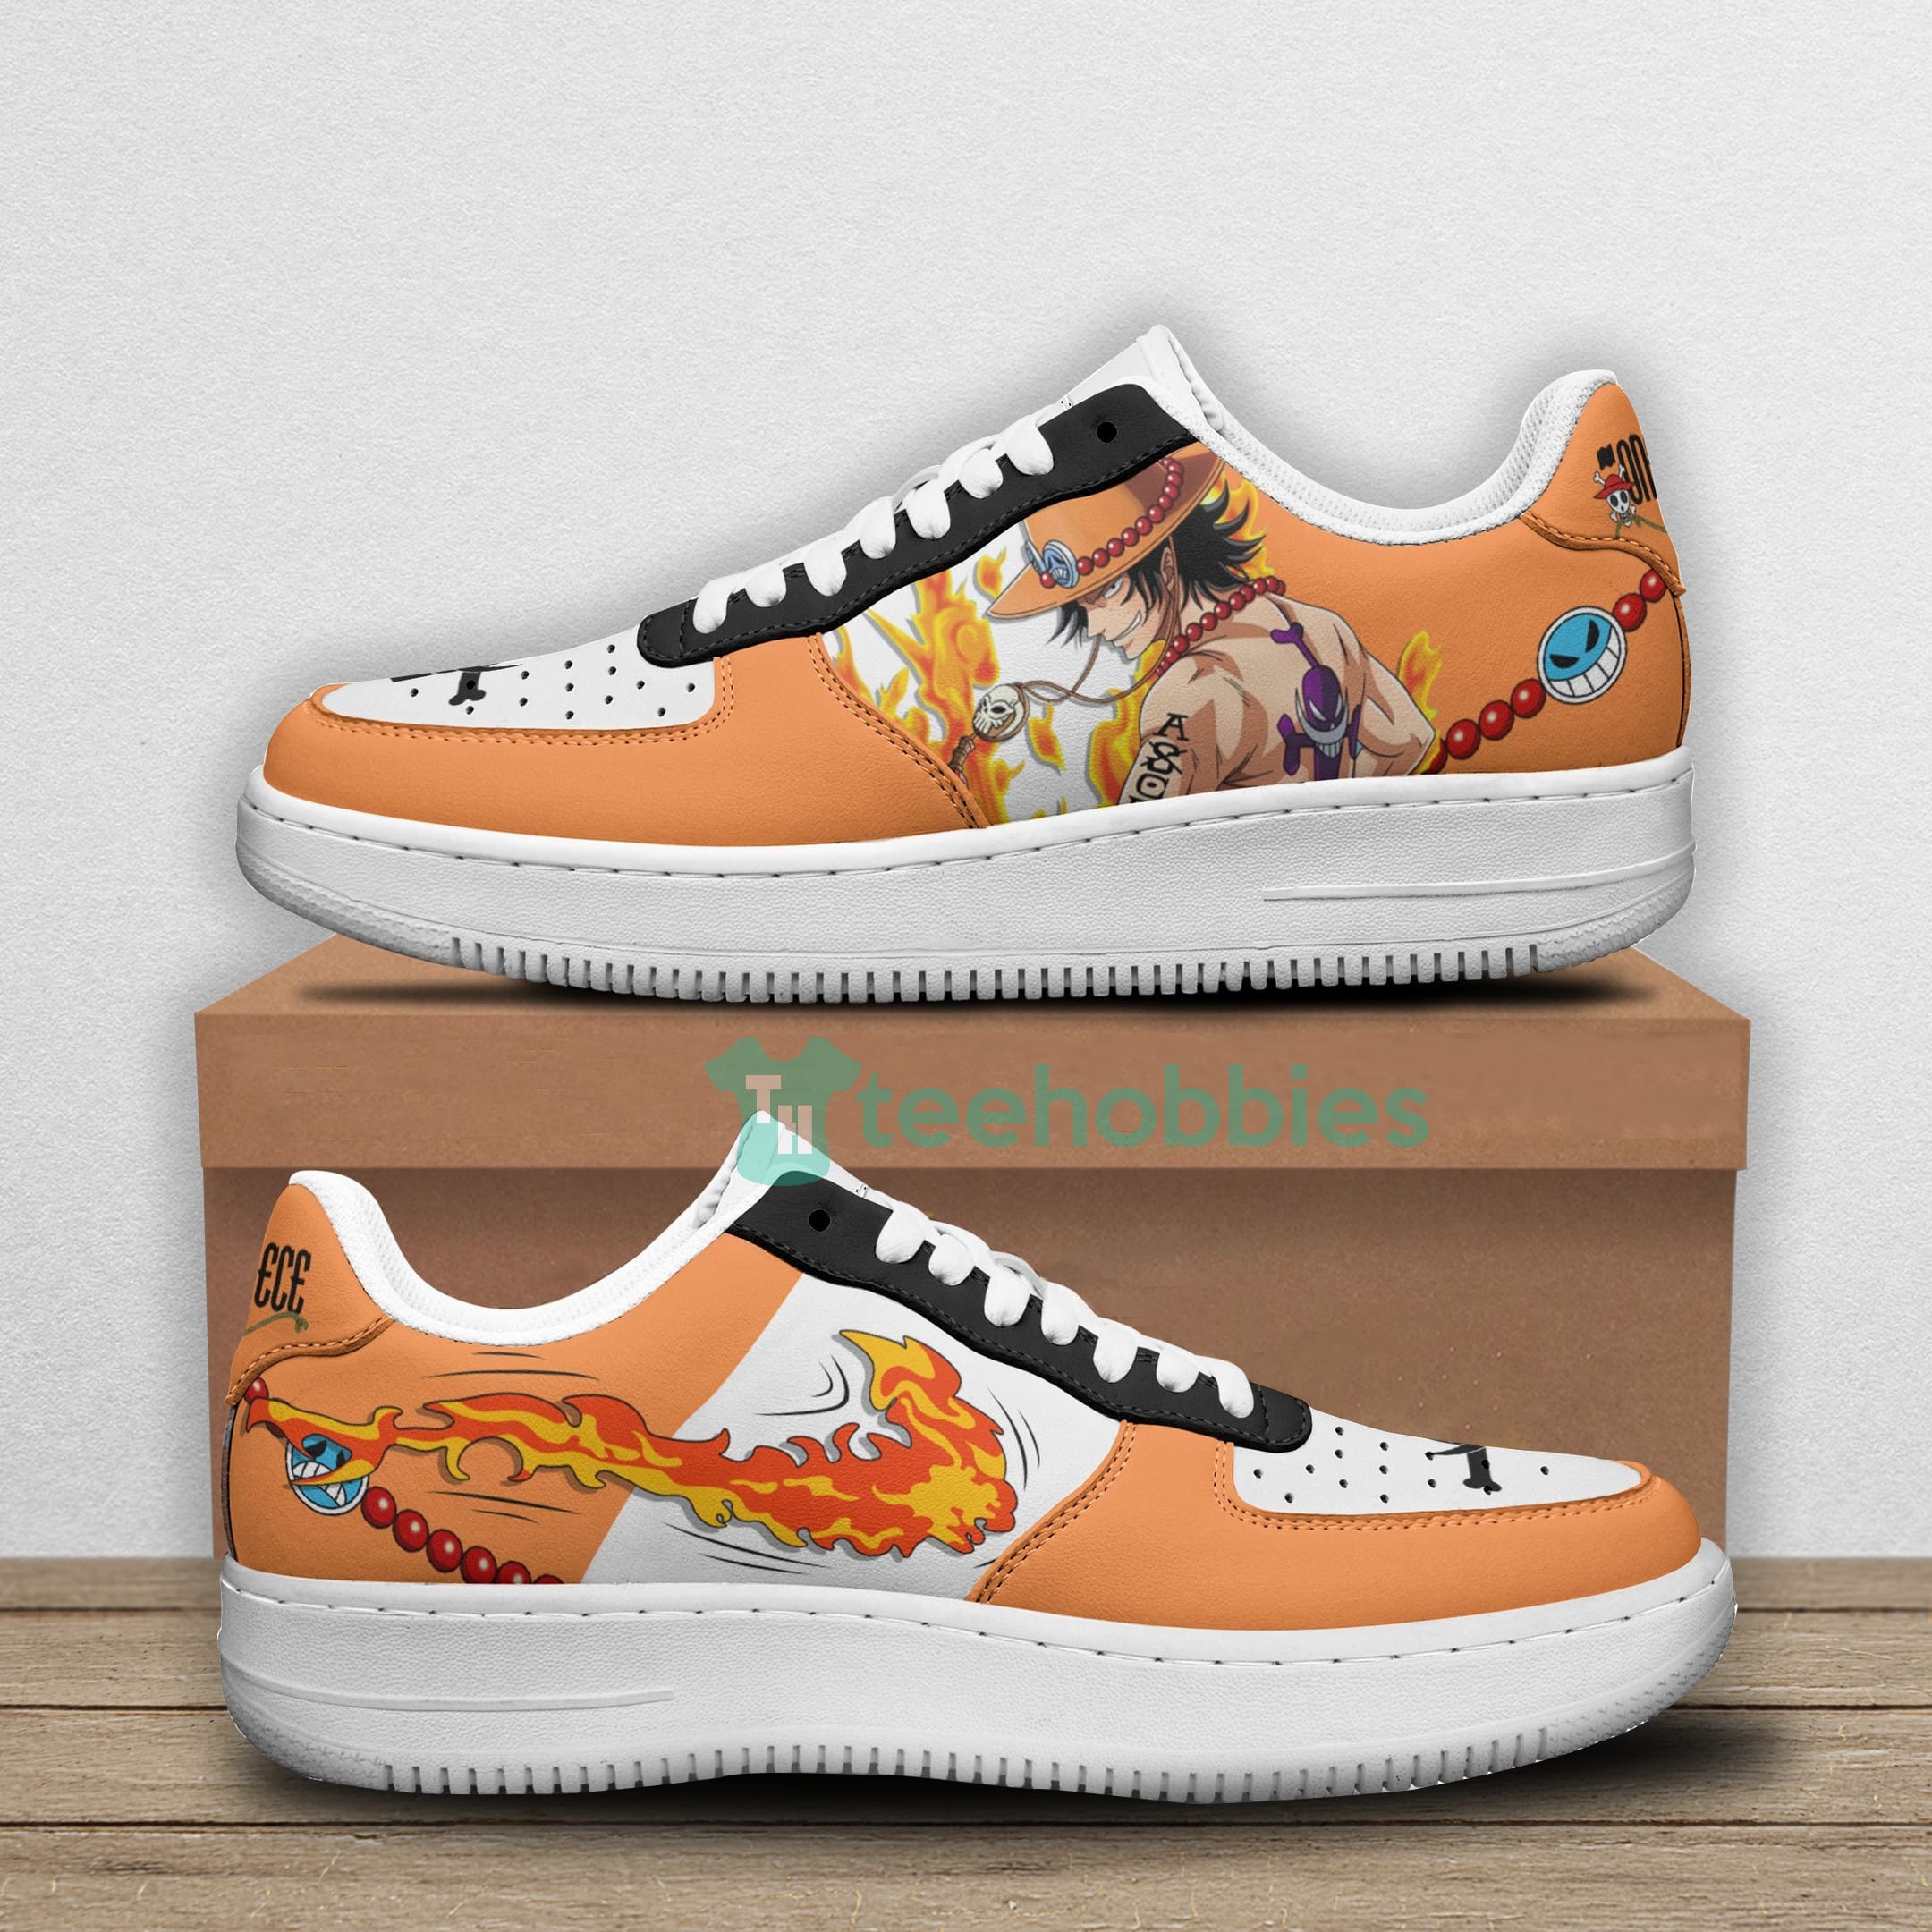 Portgas D Ace Custom One Piece Anime For Fans Air Force Shoes